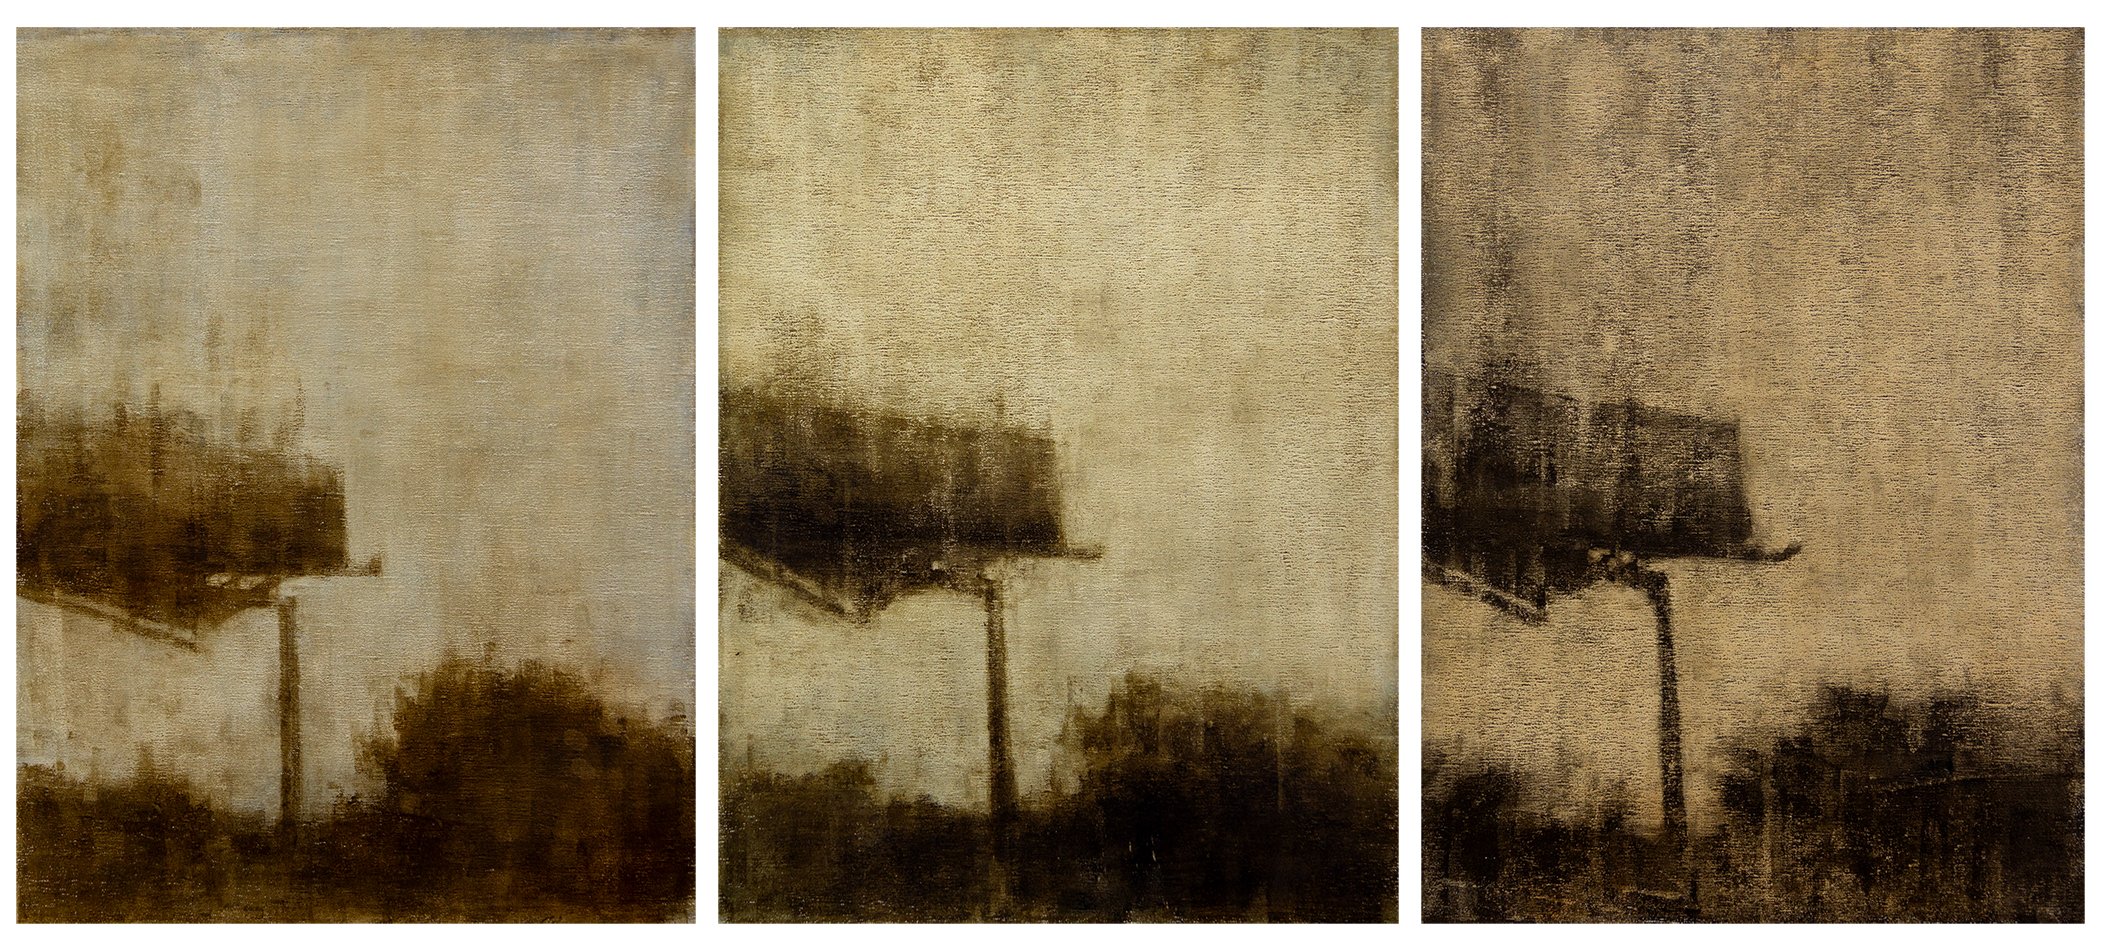 Mayday, Mayday, Mayday, 22"x17" each, oil on unstretched linen